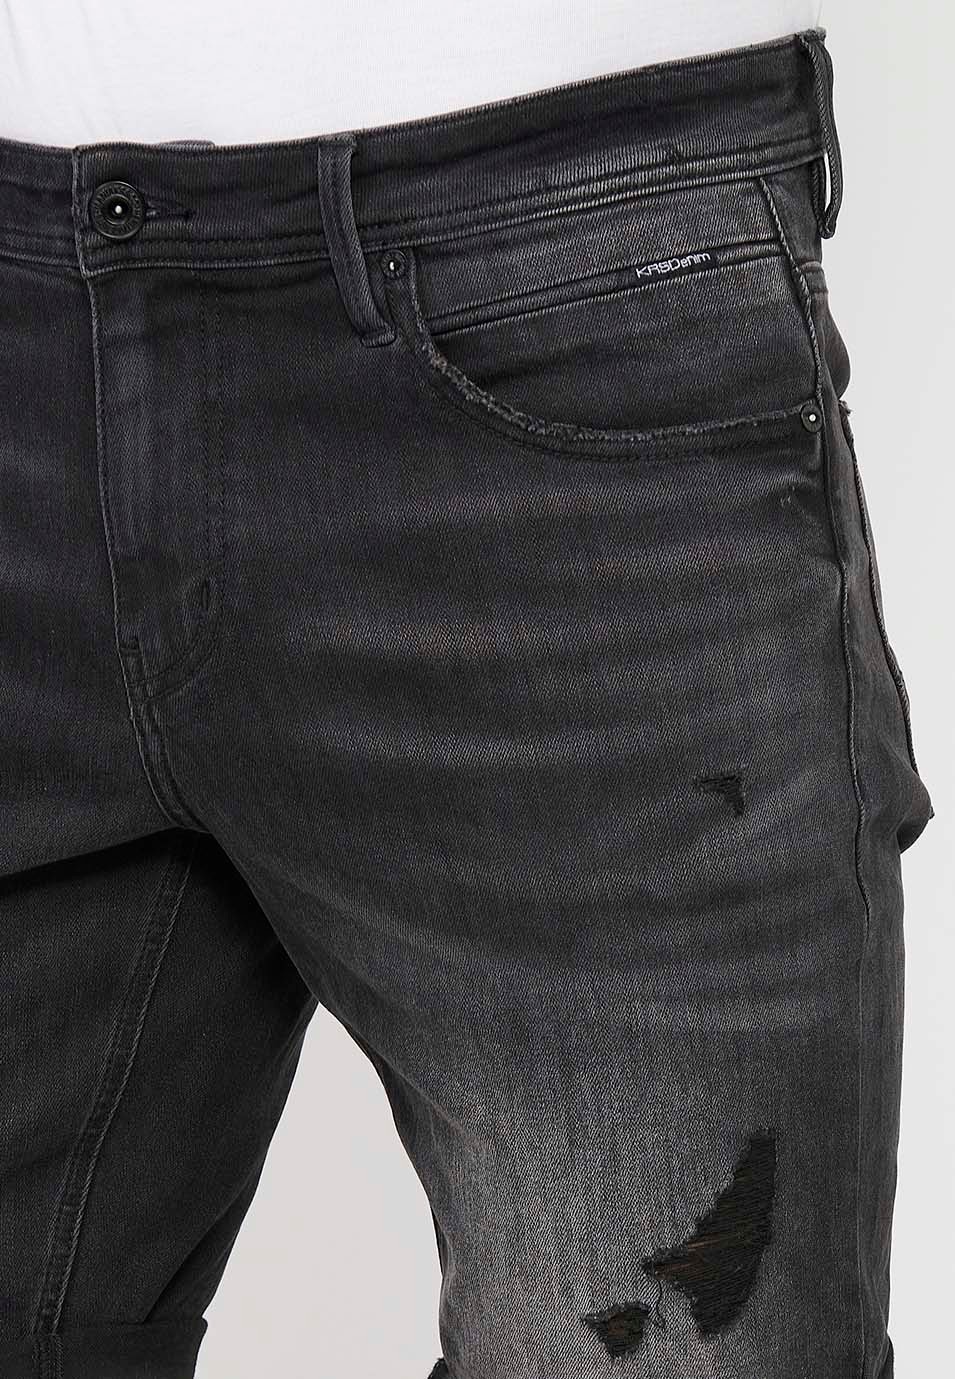 Black Denim Bermuda Shorts with Turn-Up Finish and Front Zipper and Button Closure for Men 9